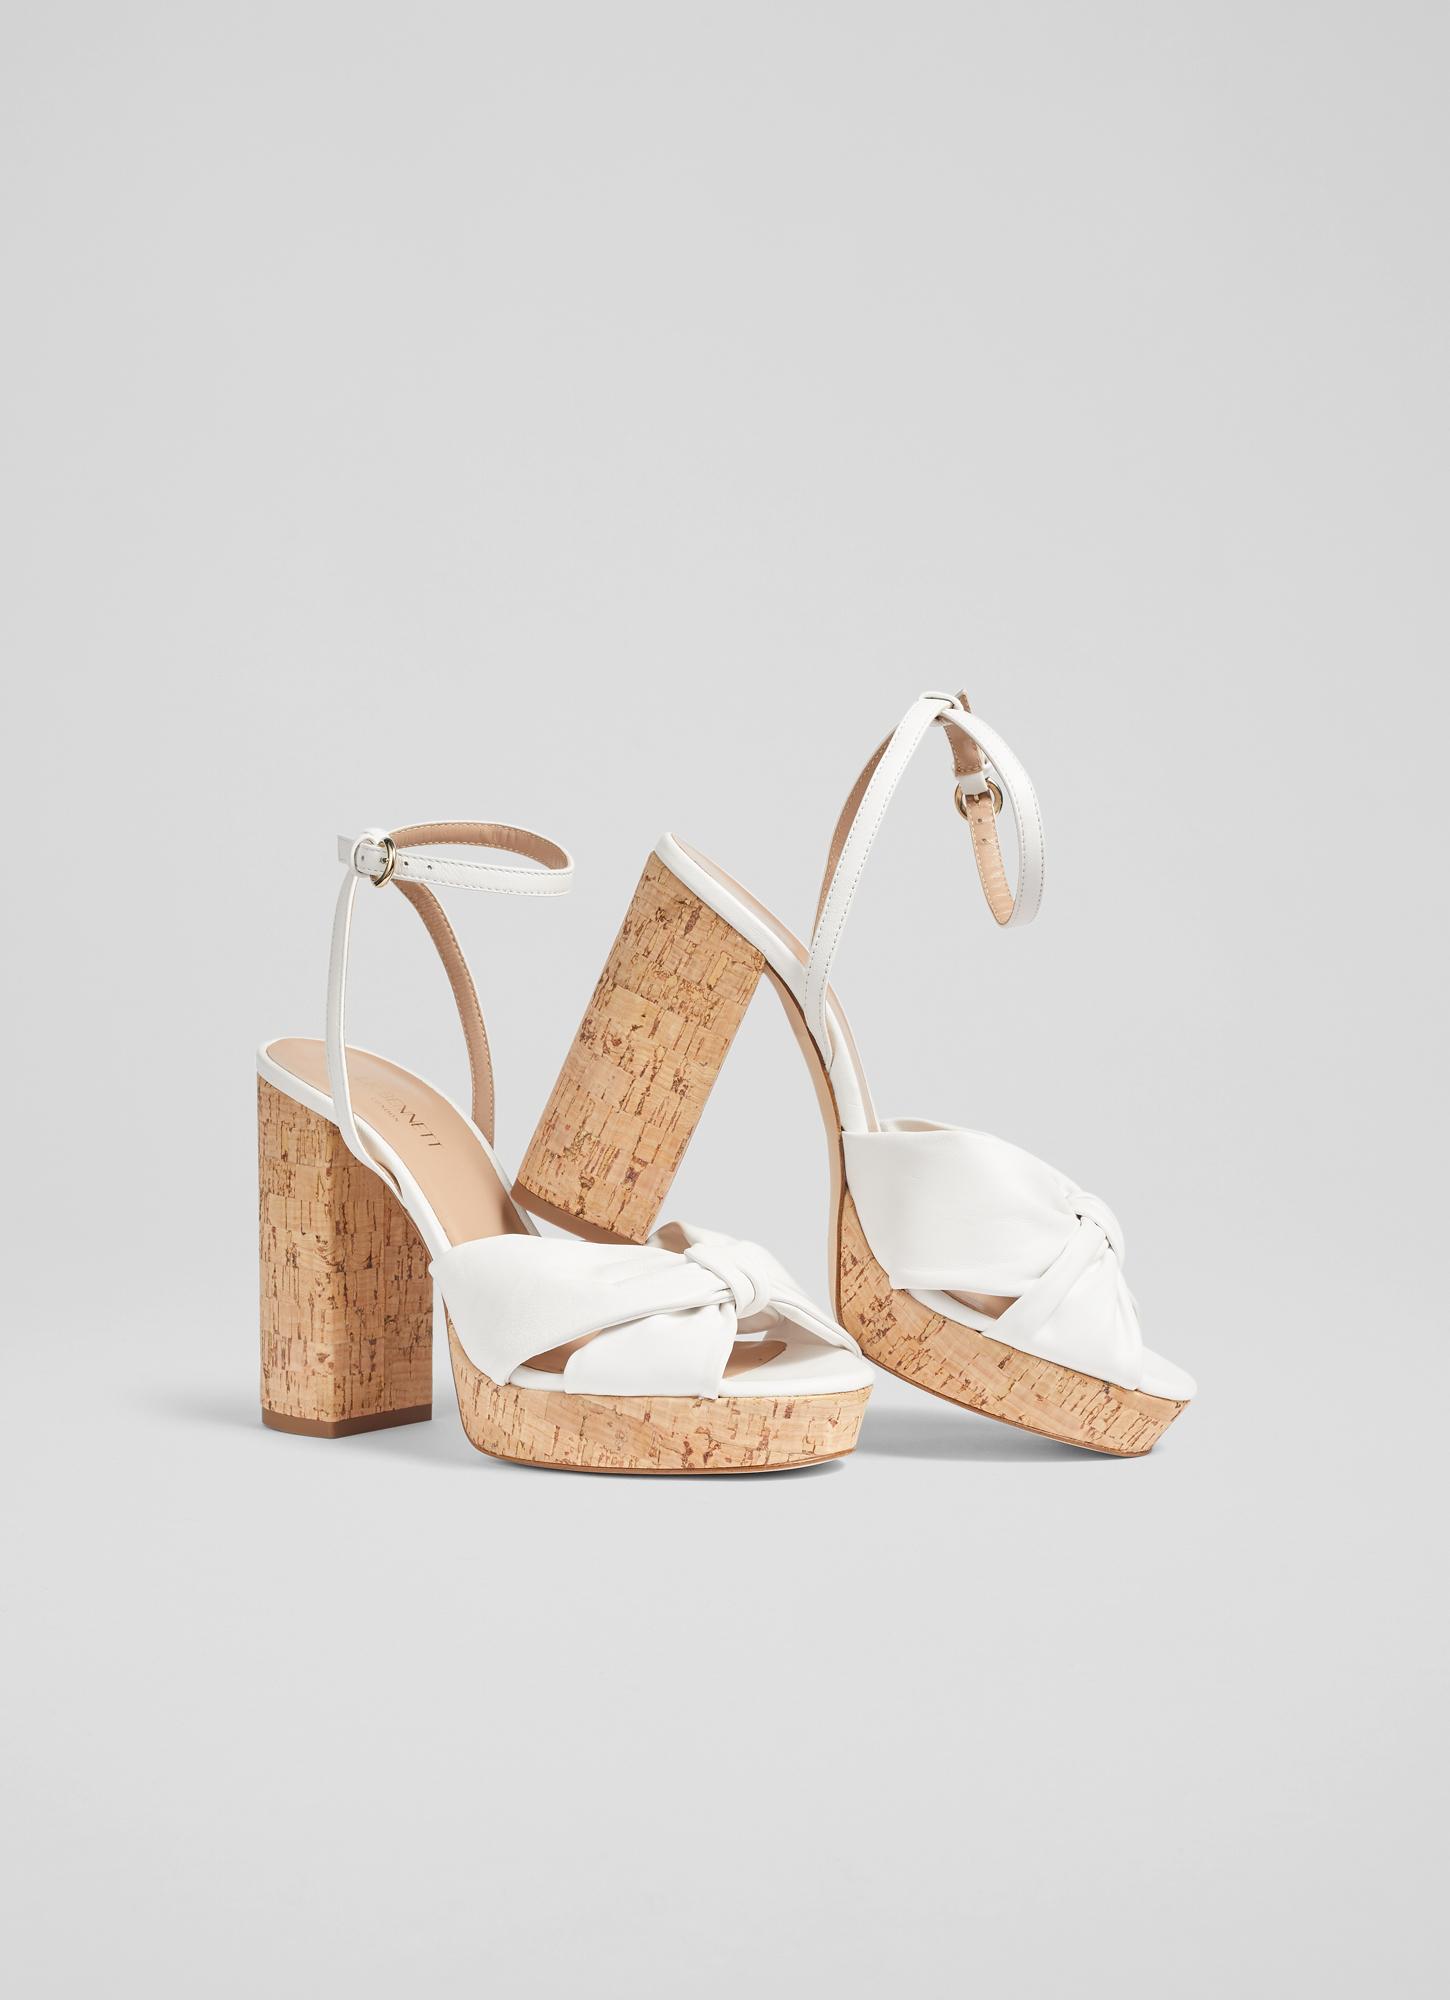 Buy Cork Sandals Made in Portugal Woman Shoes Fashion Summer Online in  India - Etsy